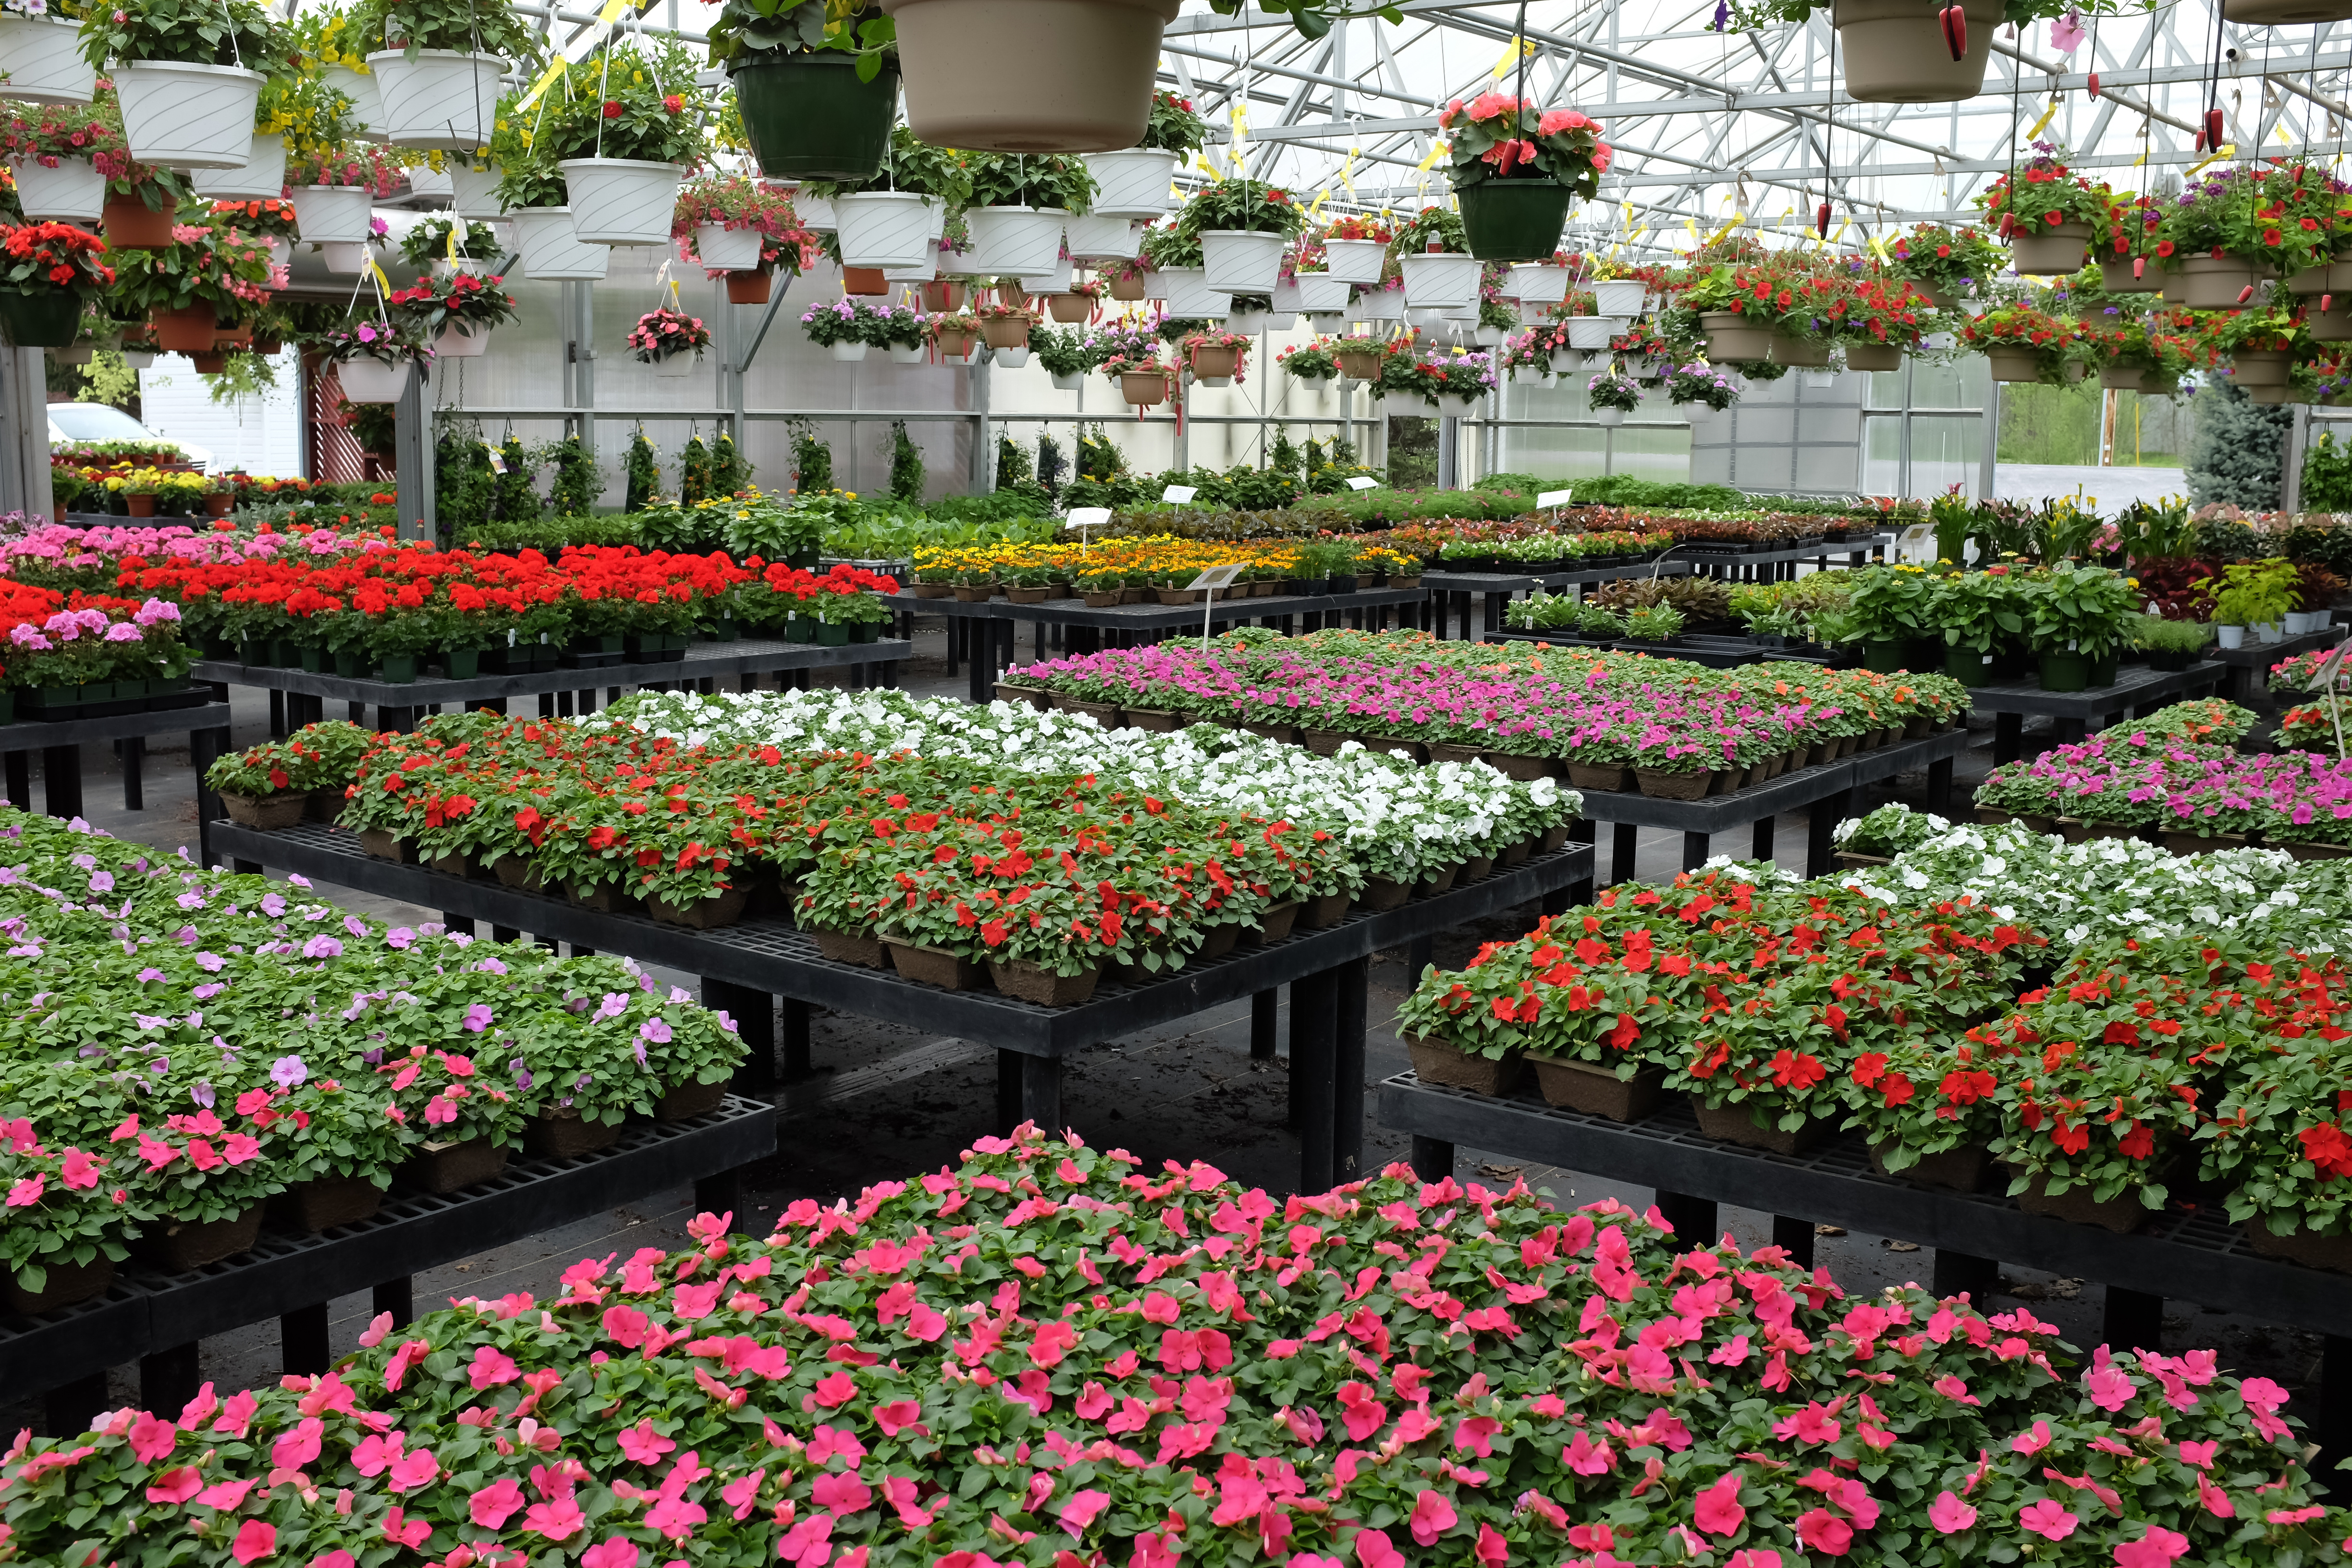 Annual flowers for sale in greenhouse